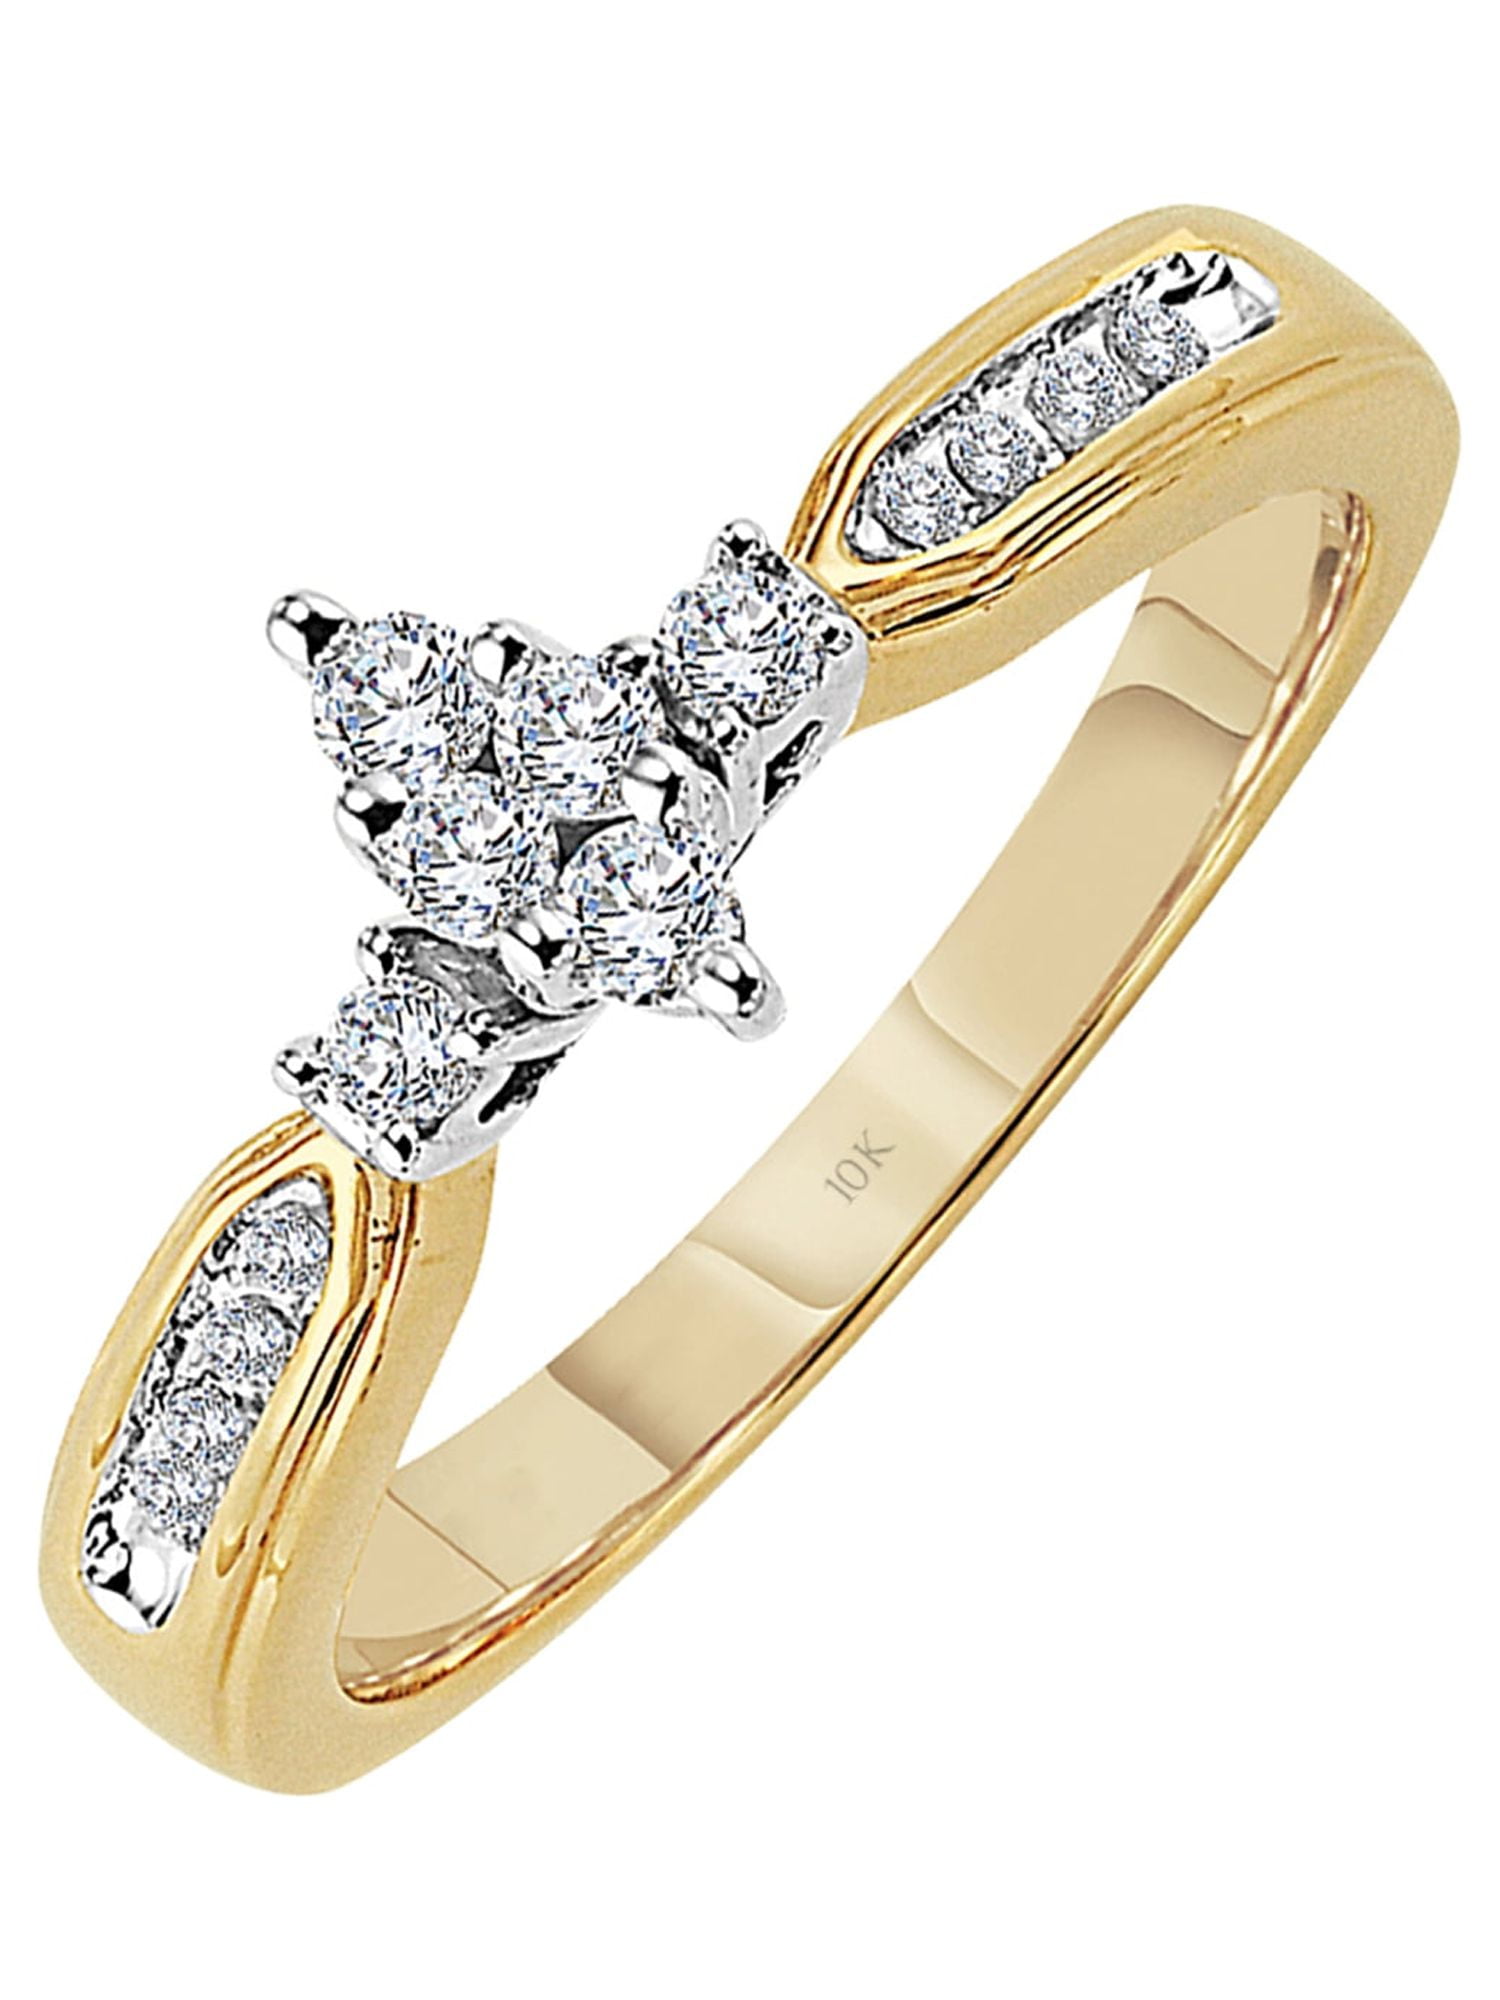 Buy Couple Ring Bridal Set His Hers 10k Women Yellow Gold Filled Men  Stainless Steel Engagement Ring Set at Amazon.in